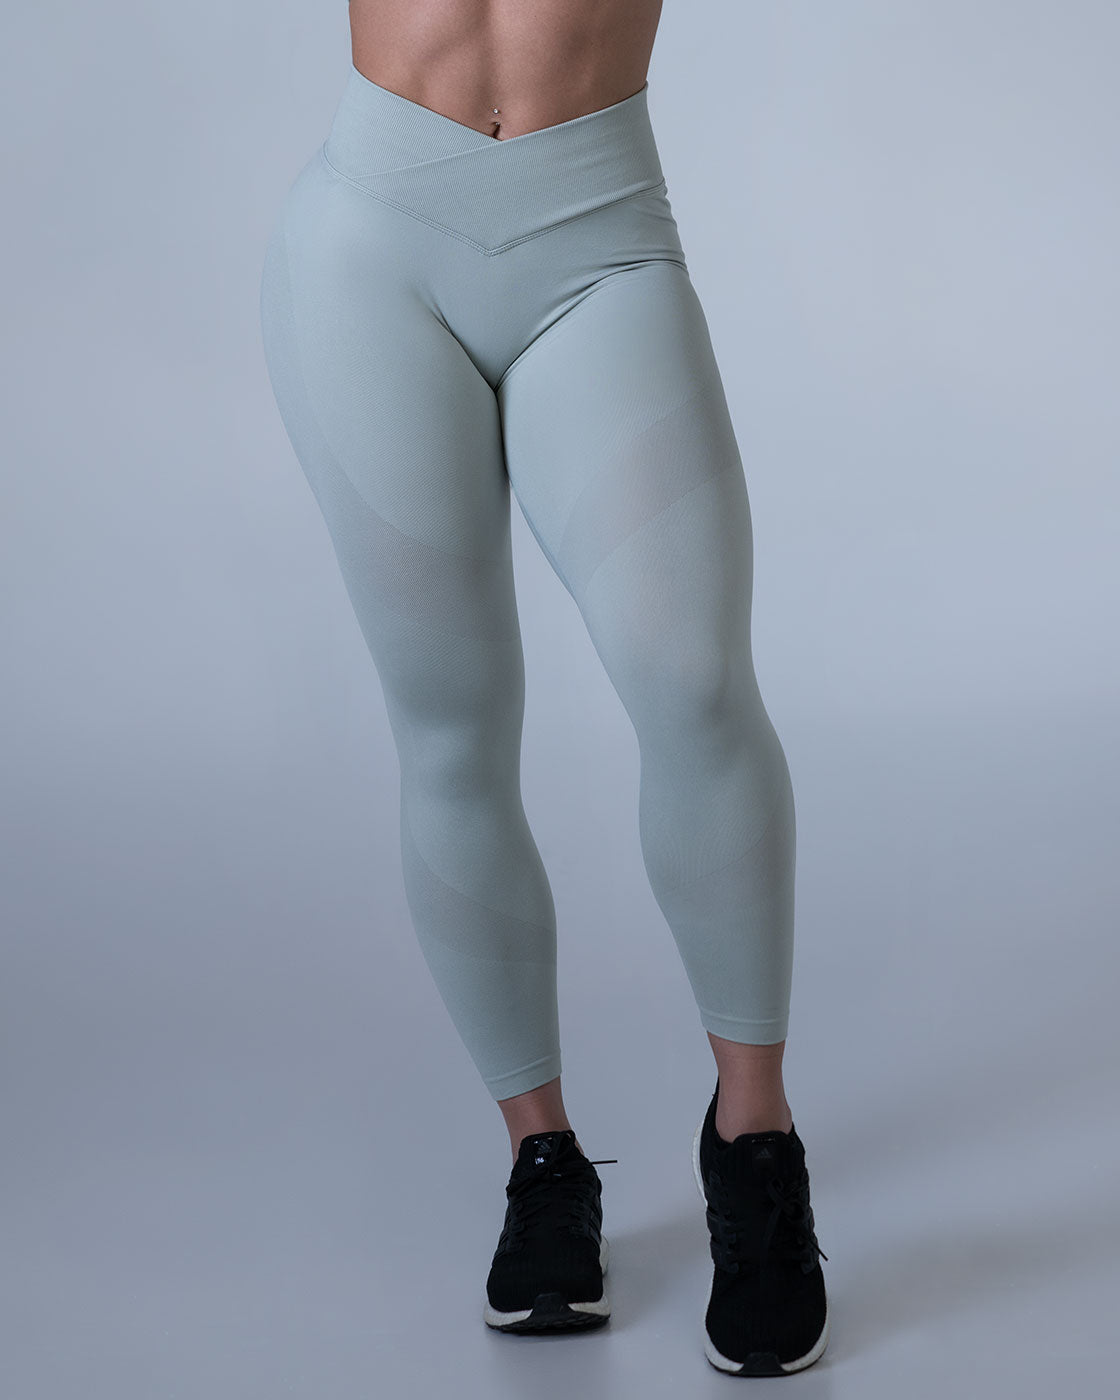 Violate The Dress Code - 🚨New Drop 🚨 Undisputed hottest leggings